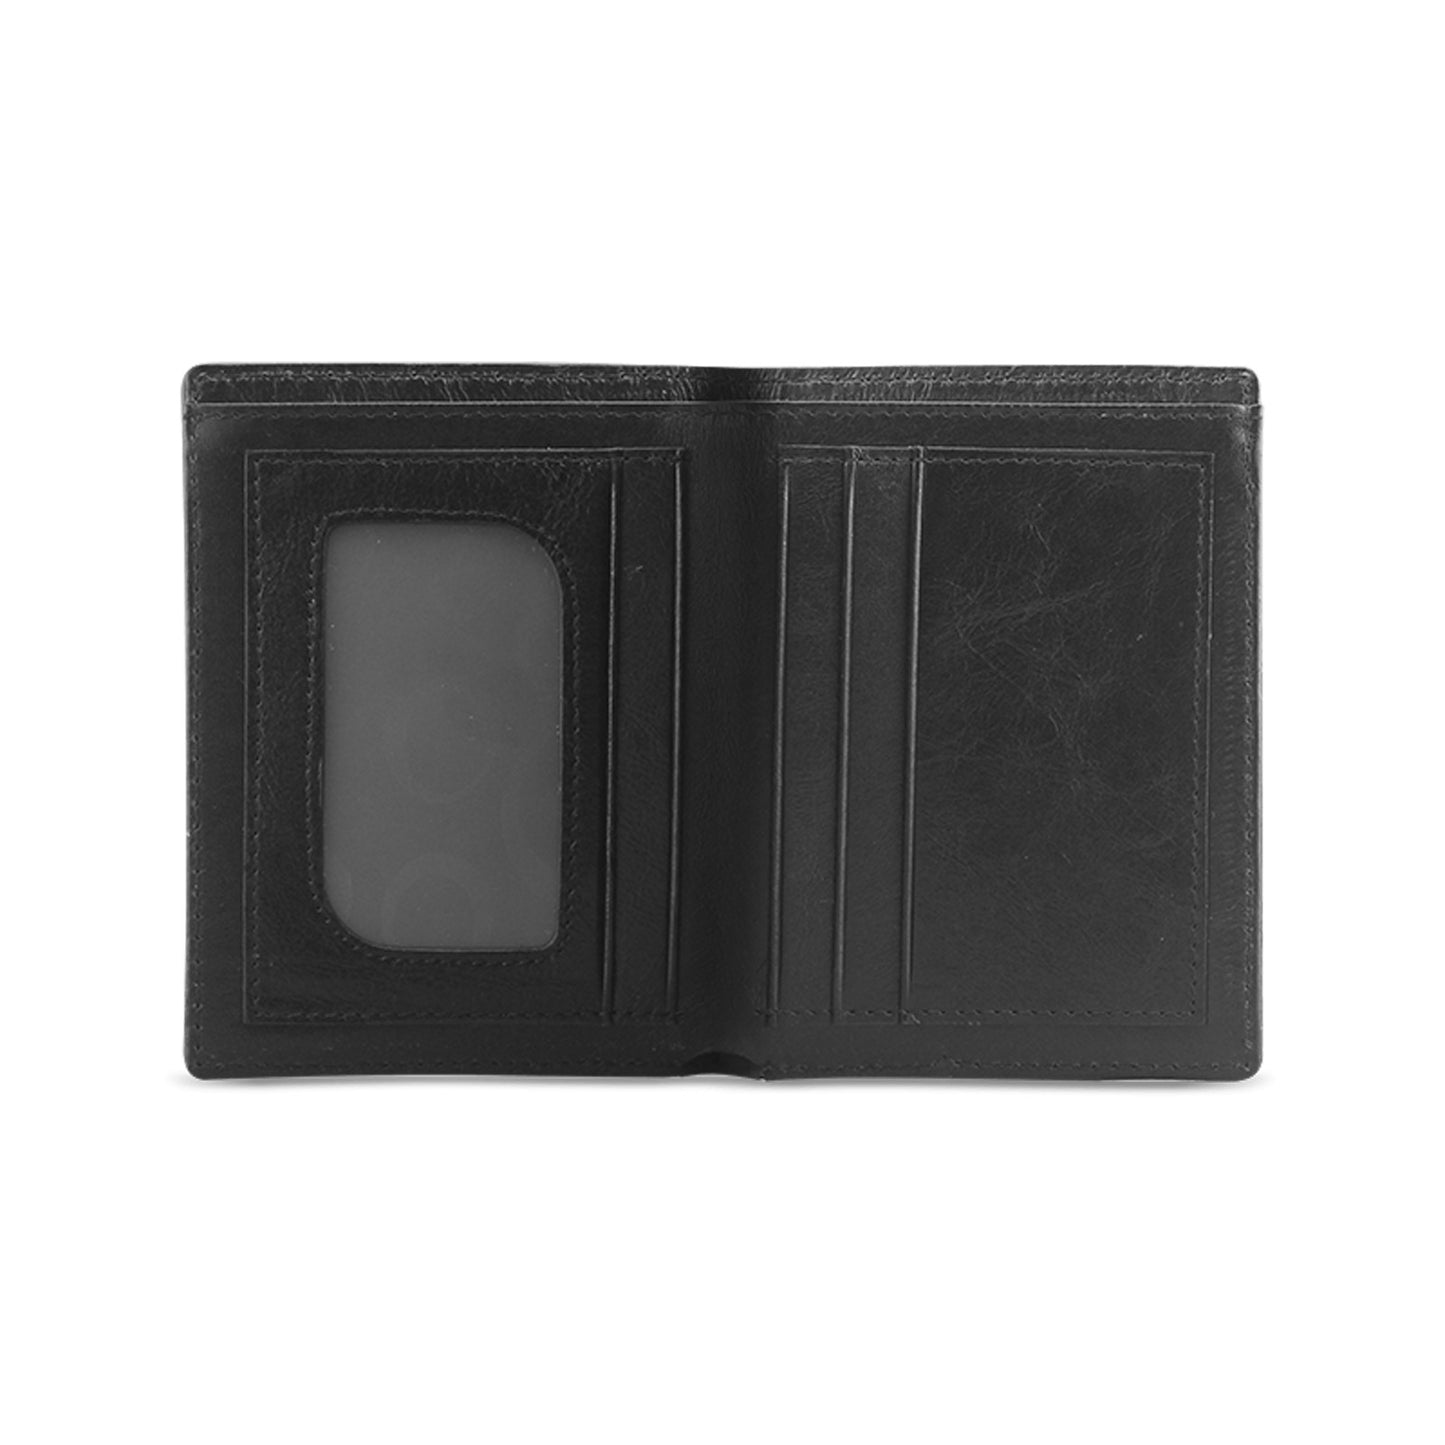 Coco Men's Leather Wallet